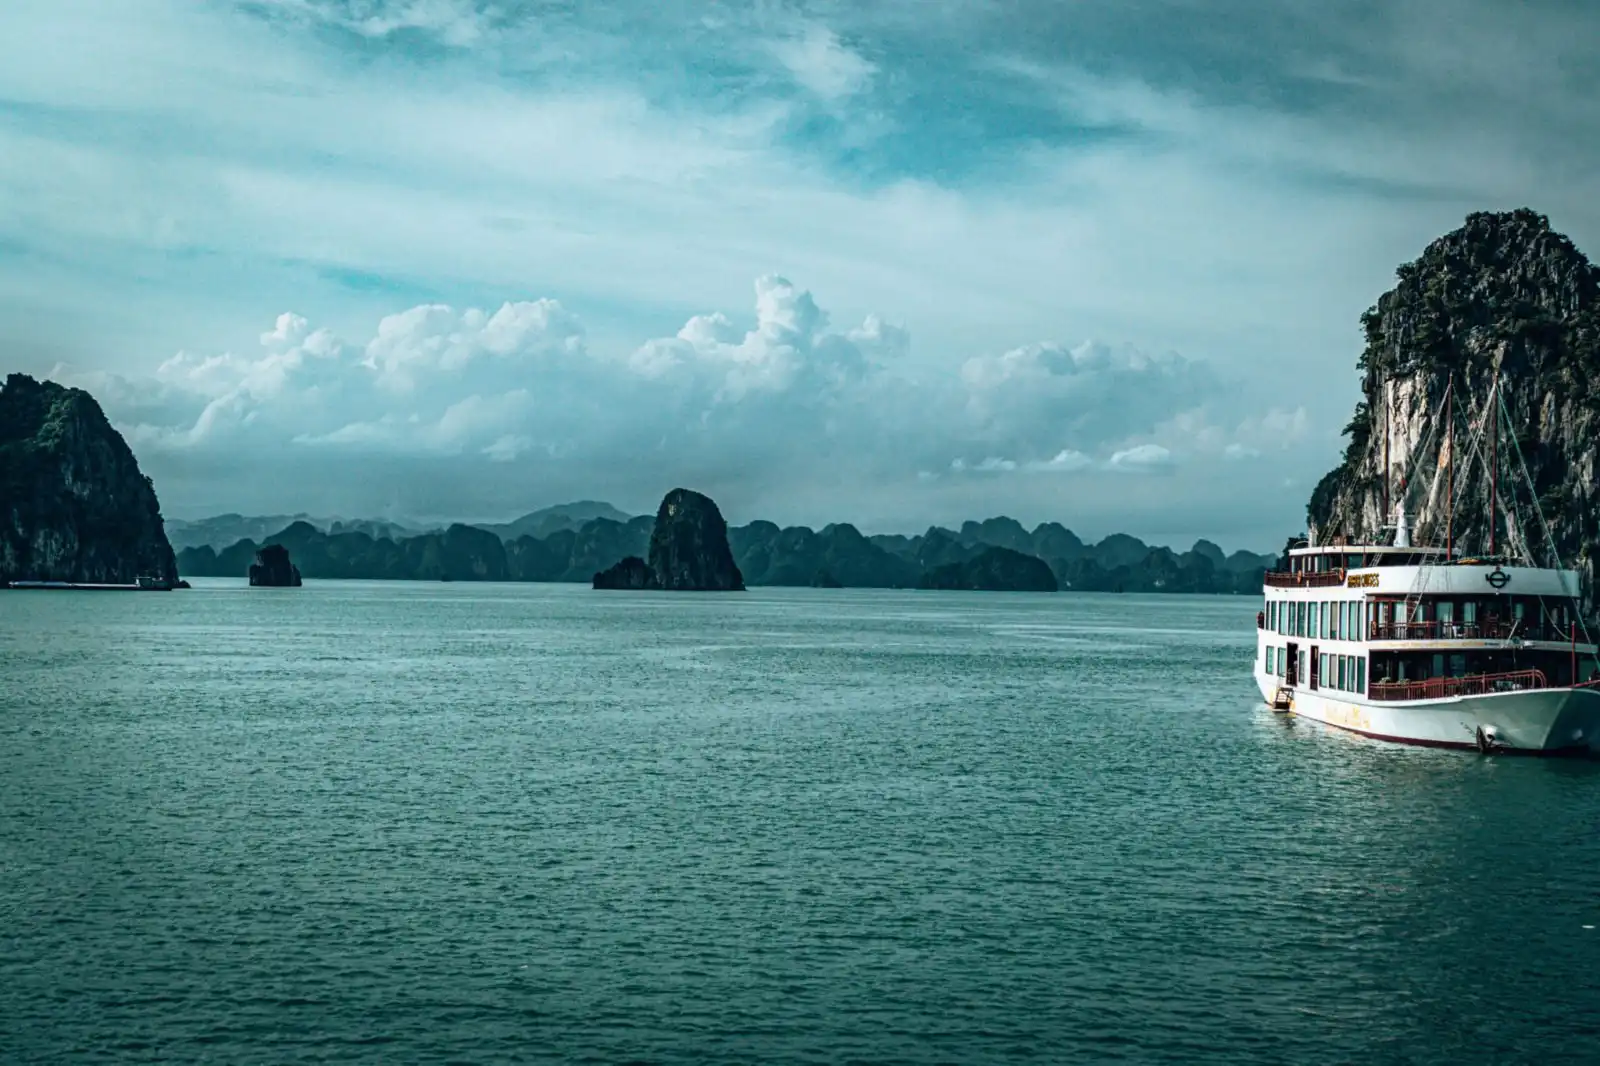 Bai Tu Long Bay tour incredible scenery with another cruise boat